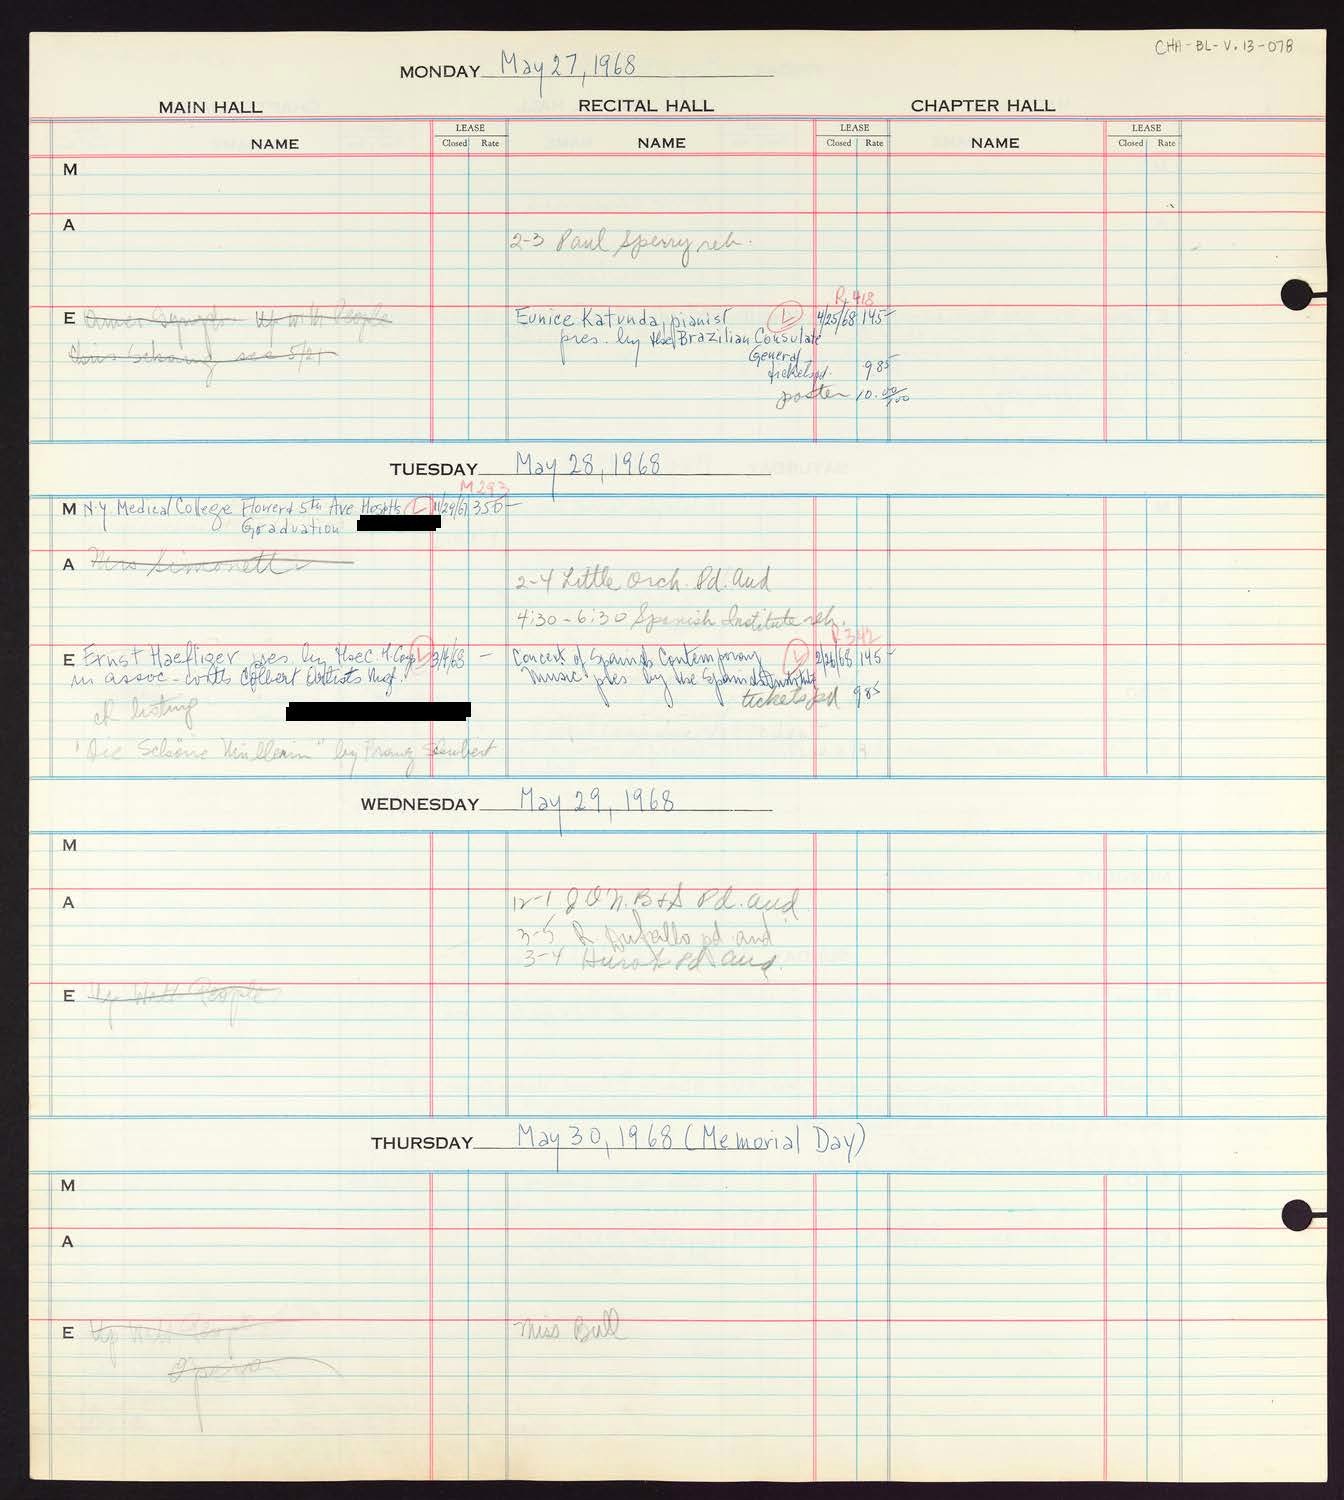 Carnegie Hall Booking Ledger, volume 13, page 78